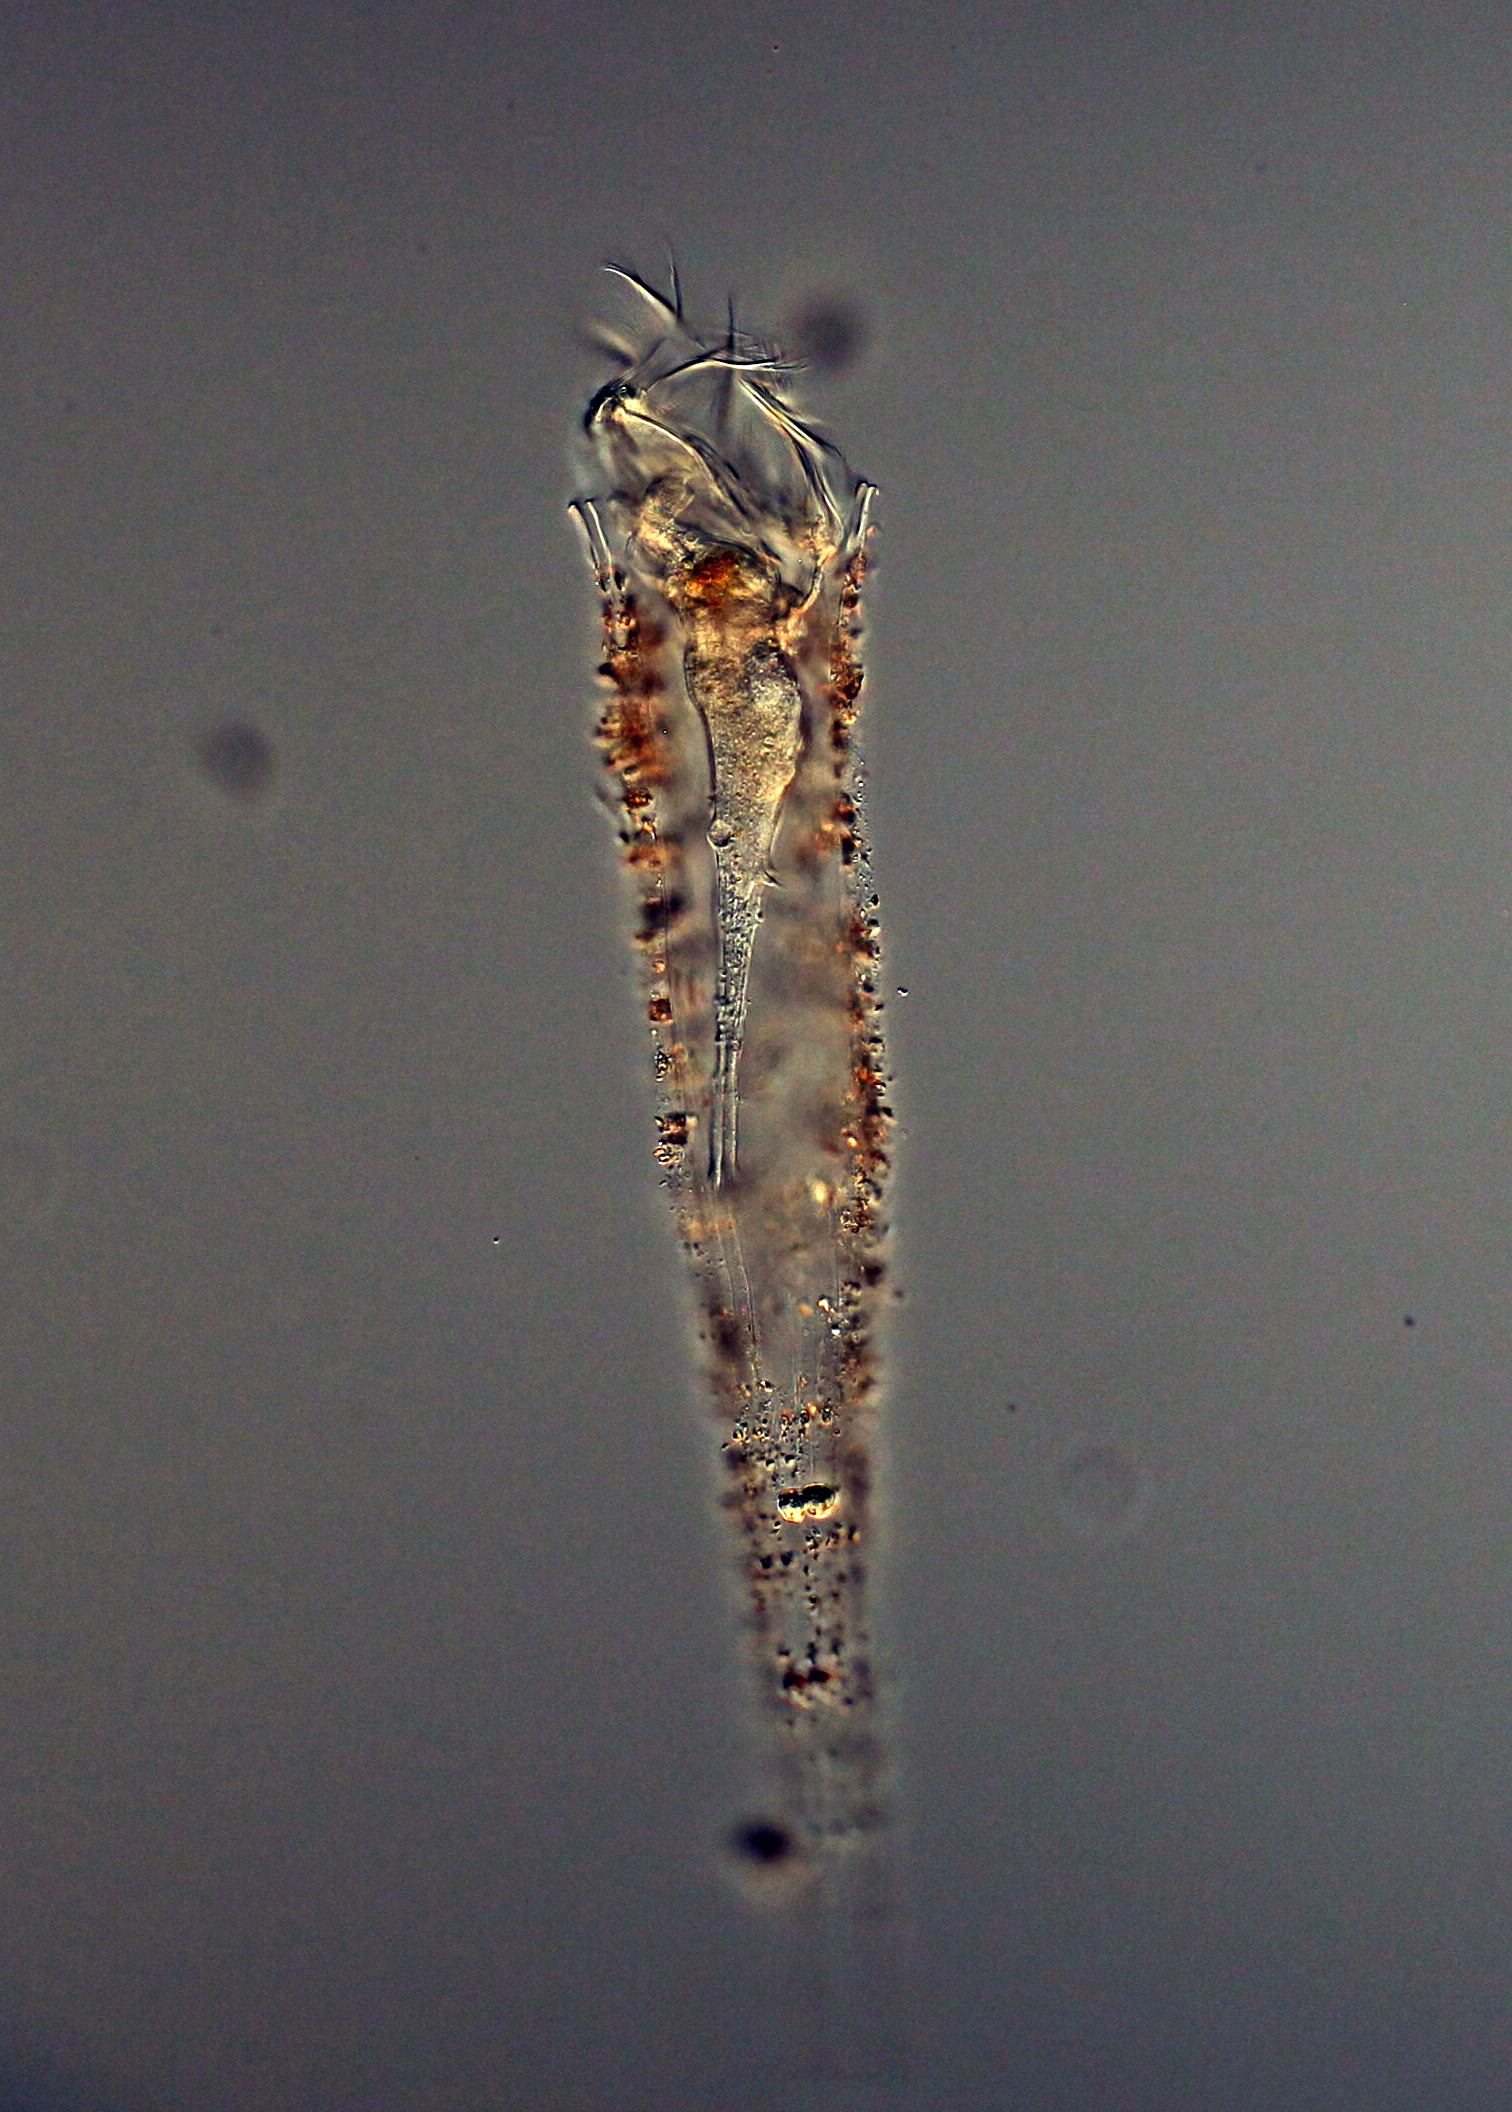 Tintinnid ciliate Daturella live from the deep